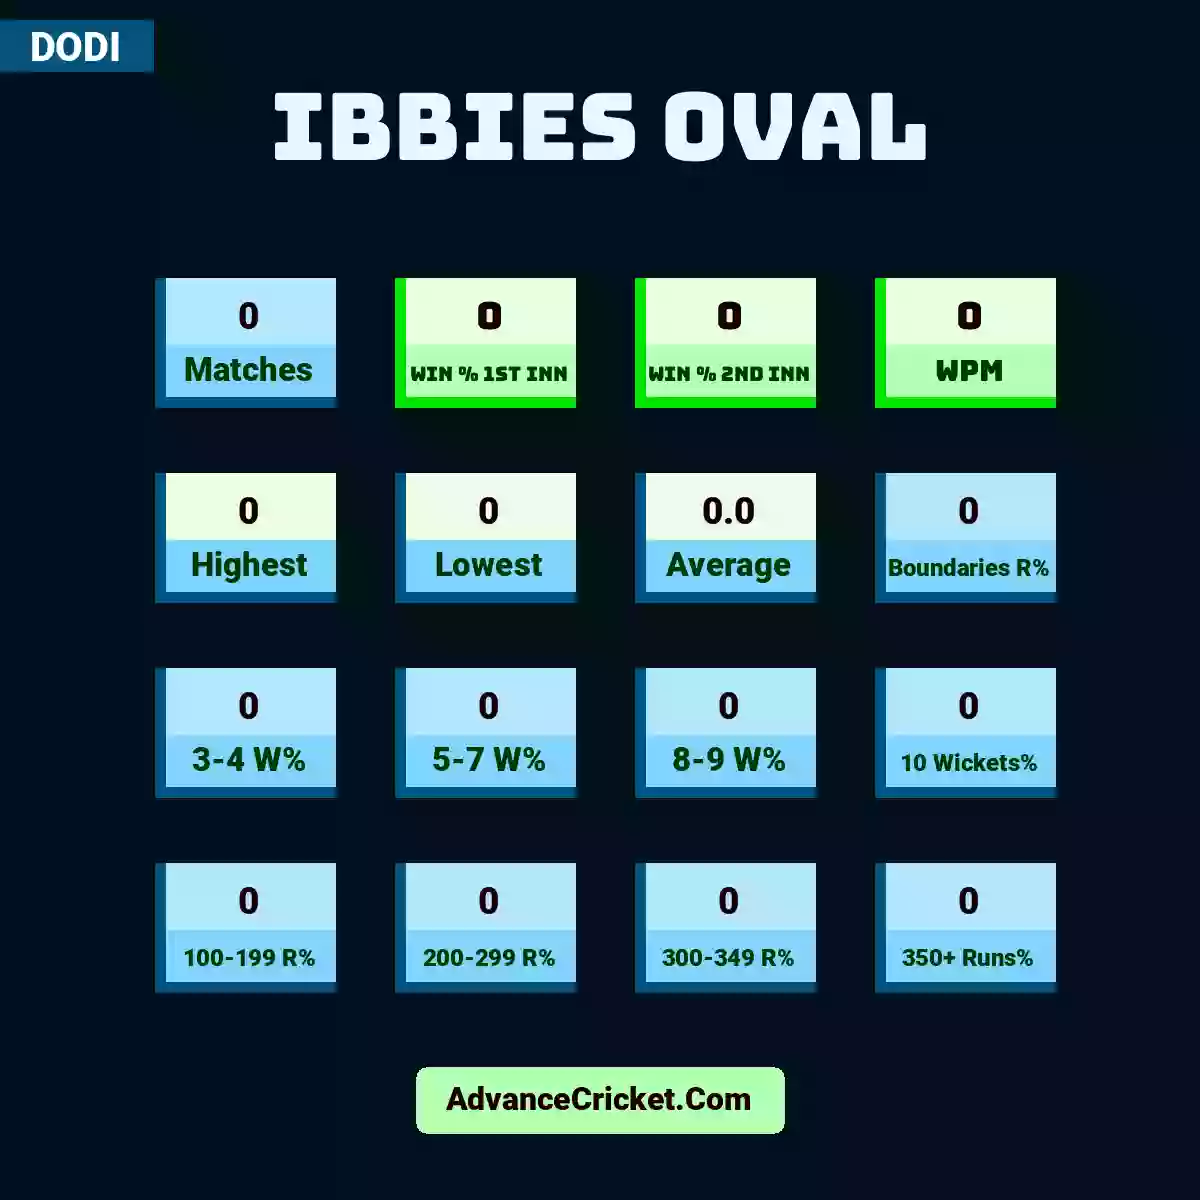 Image showing Ibbies Oval with Matches: 0, Win % 1st Inn: 0, Win % 2nd Inn: 0, WPM: 0, Highest: 0, Lowest: 0, Average: 0.0, Boundaries R%: 0, 3-4 W%: 0, 5-7 W%: 0, 8-9 W%: 0, 10 Wickets%: 0, 100-199 R%: 0, 200-299 R%: 0, 300-349 R%: 0, 350+ Runs%: 0.